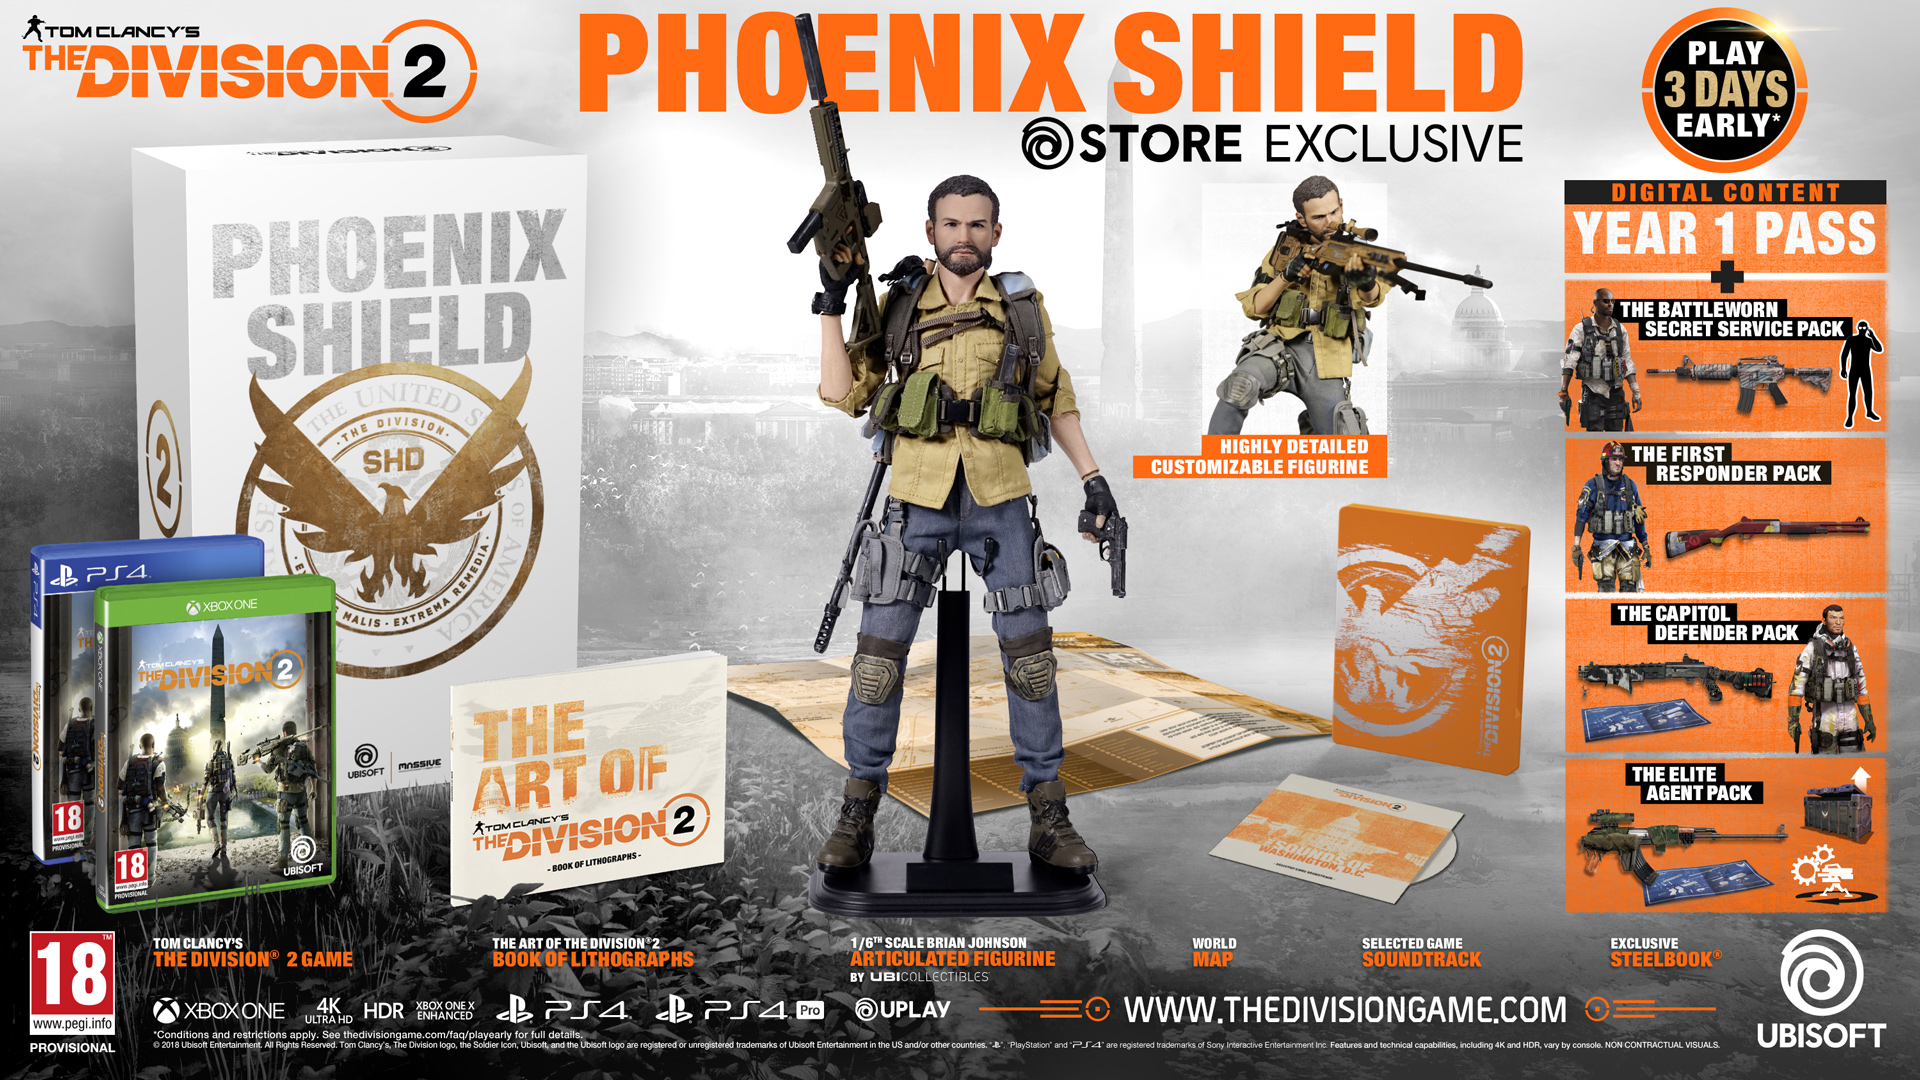 Tom Clancys The Division 2 The Phoenix Shield Edition Press Kit